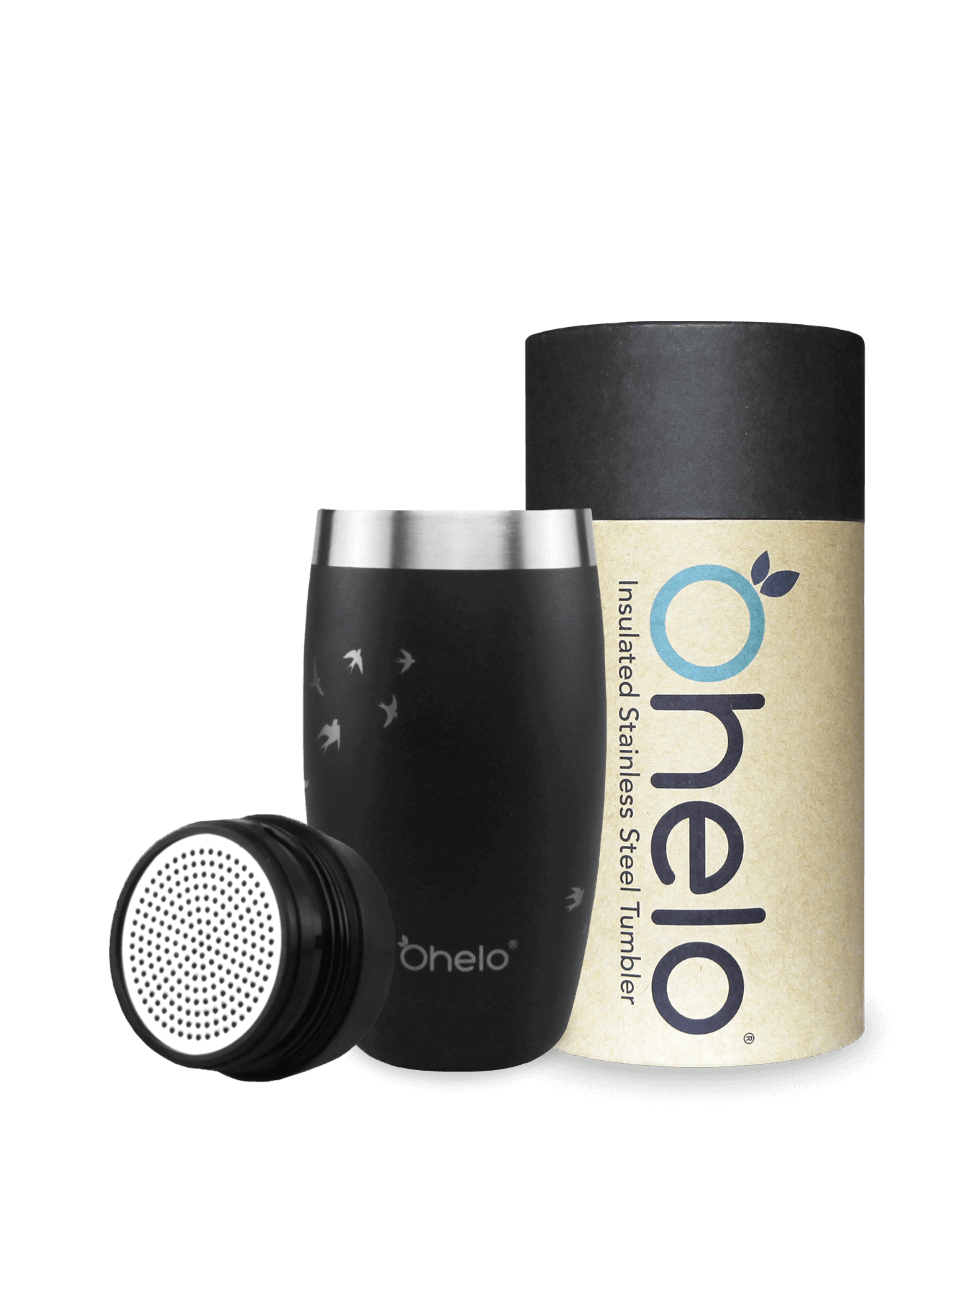 Ohelo insulated tumbler in black with bird design with recycled packaging